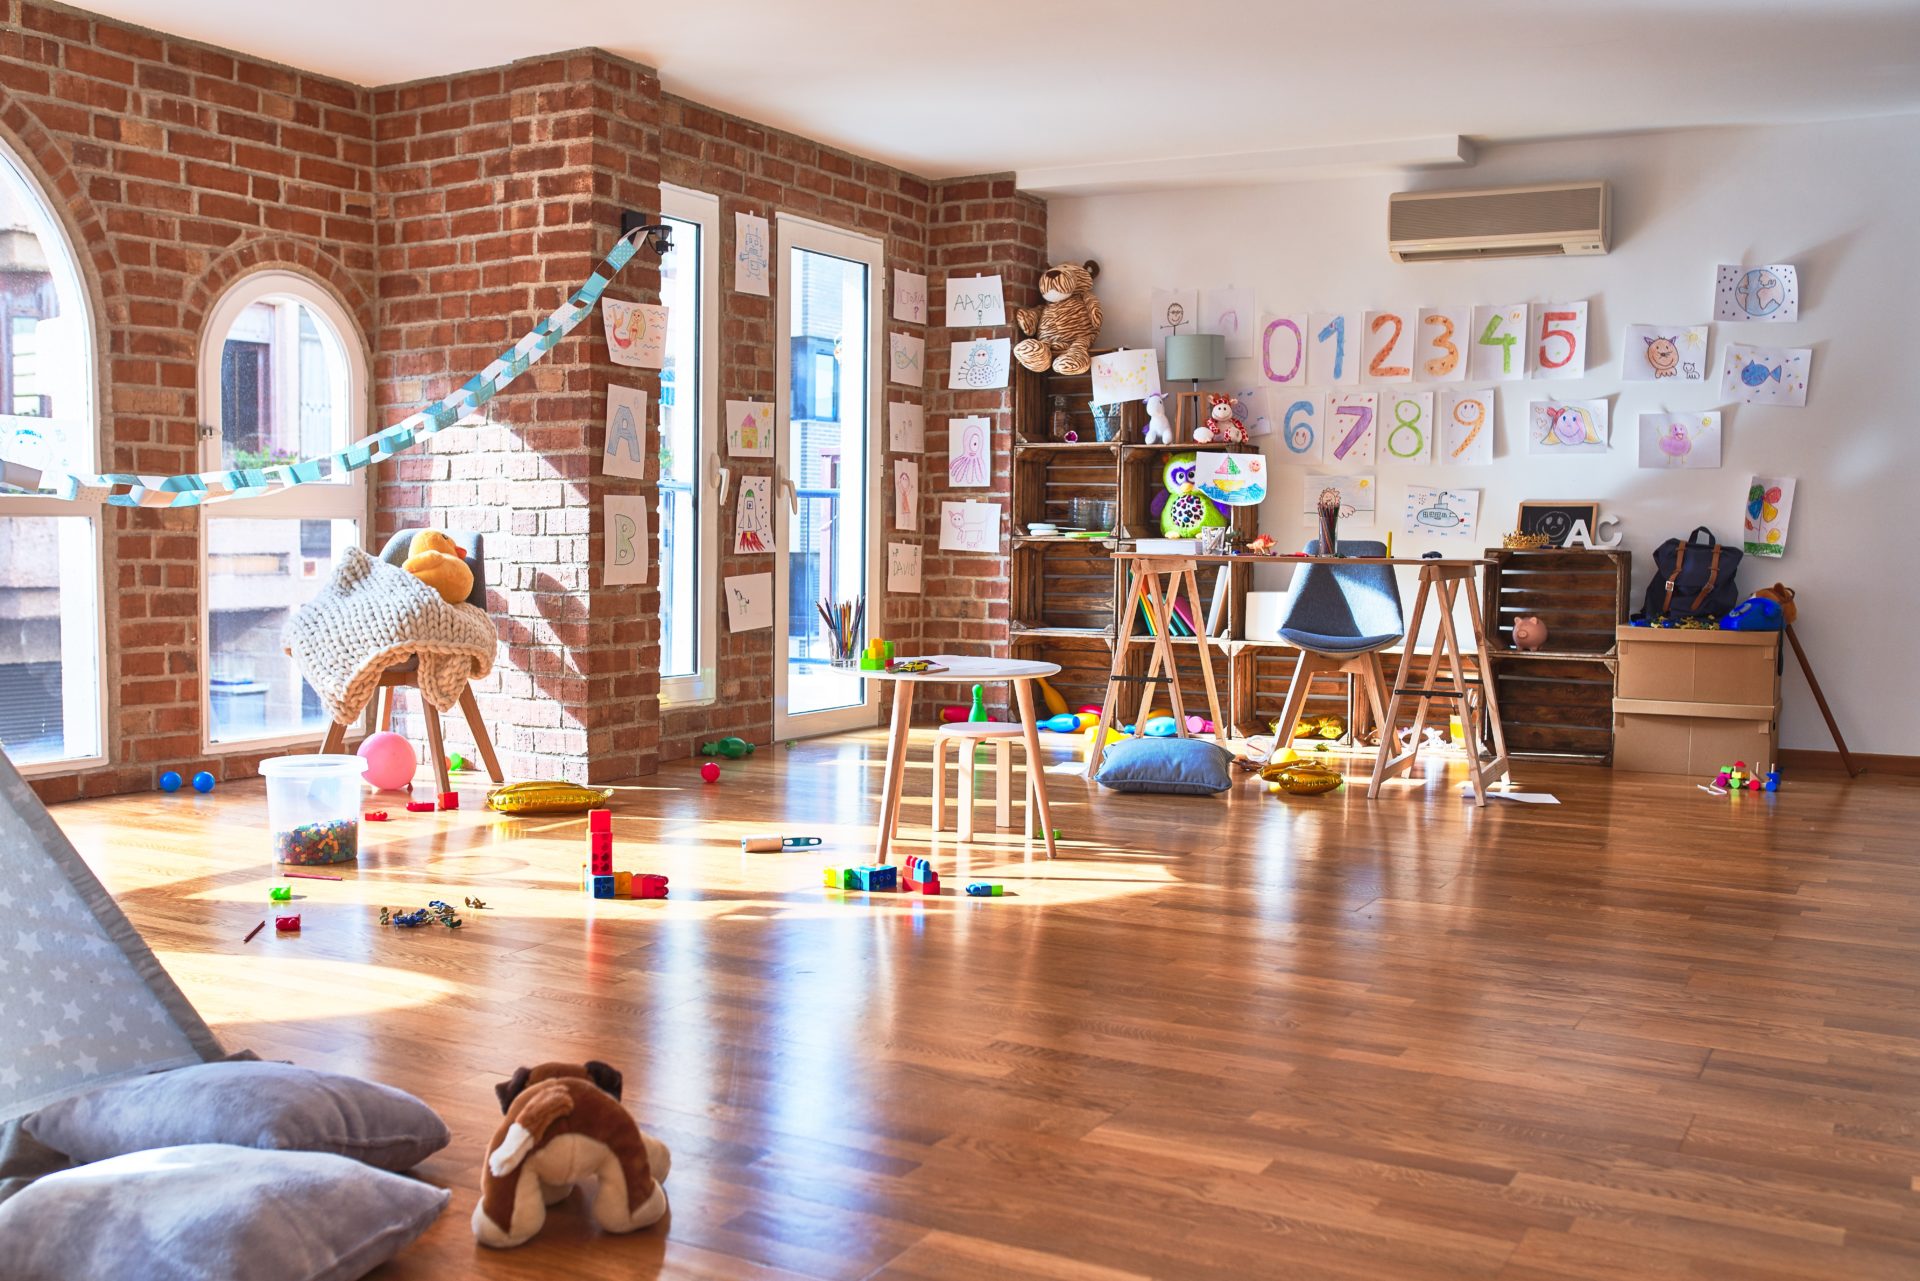 Preschool playroom with colorful furniture and toys around empty room